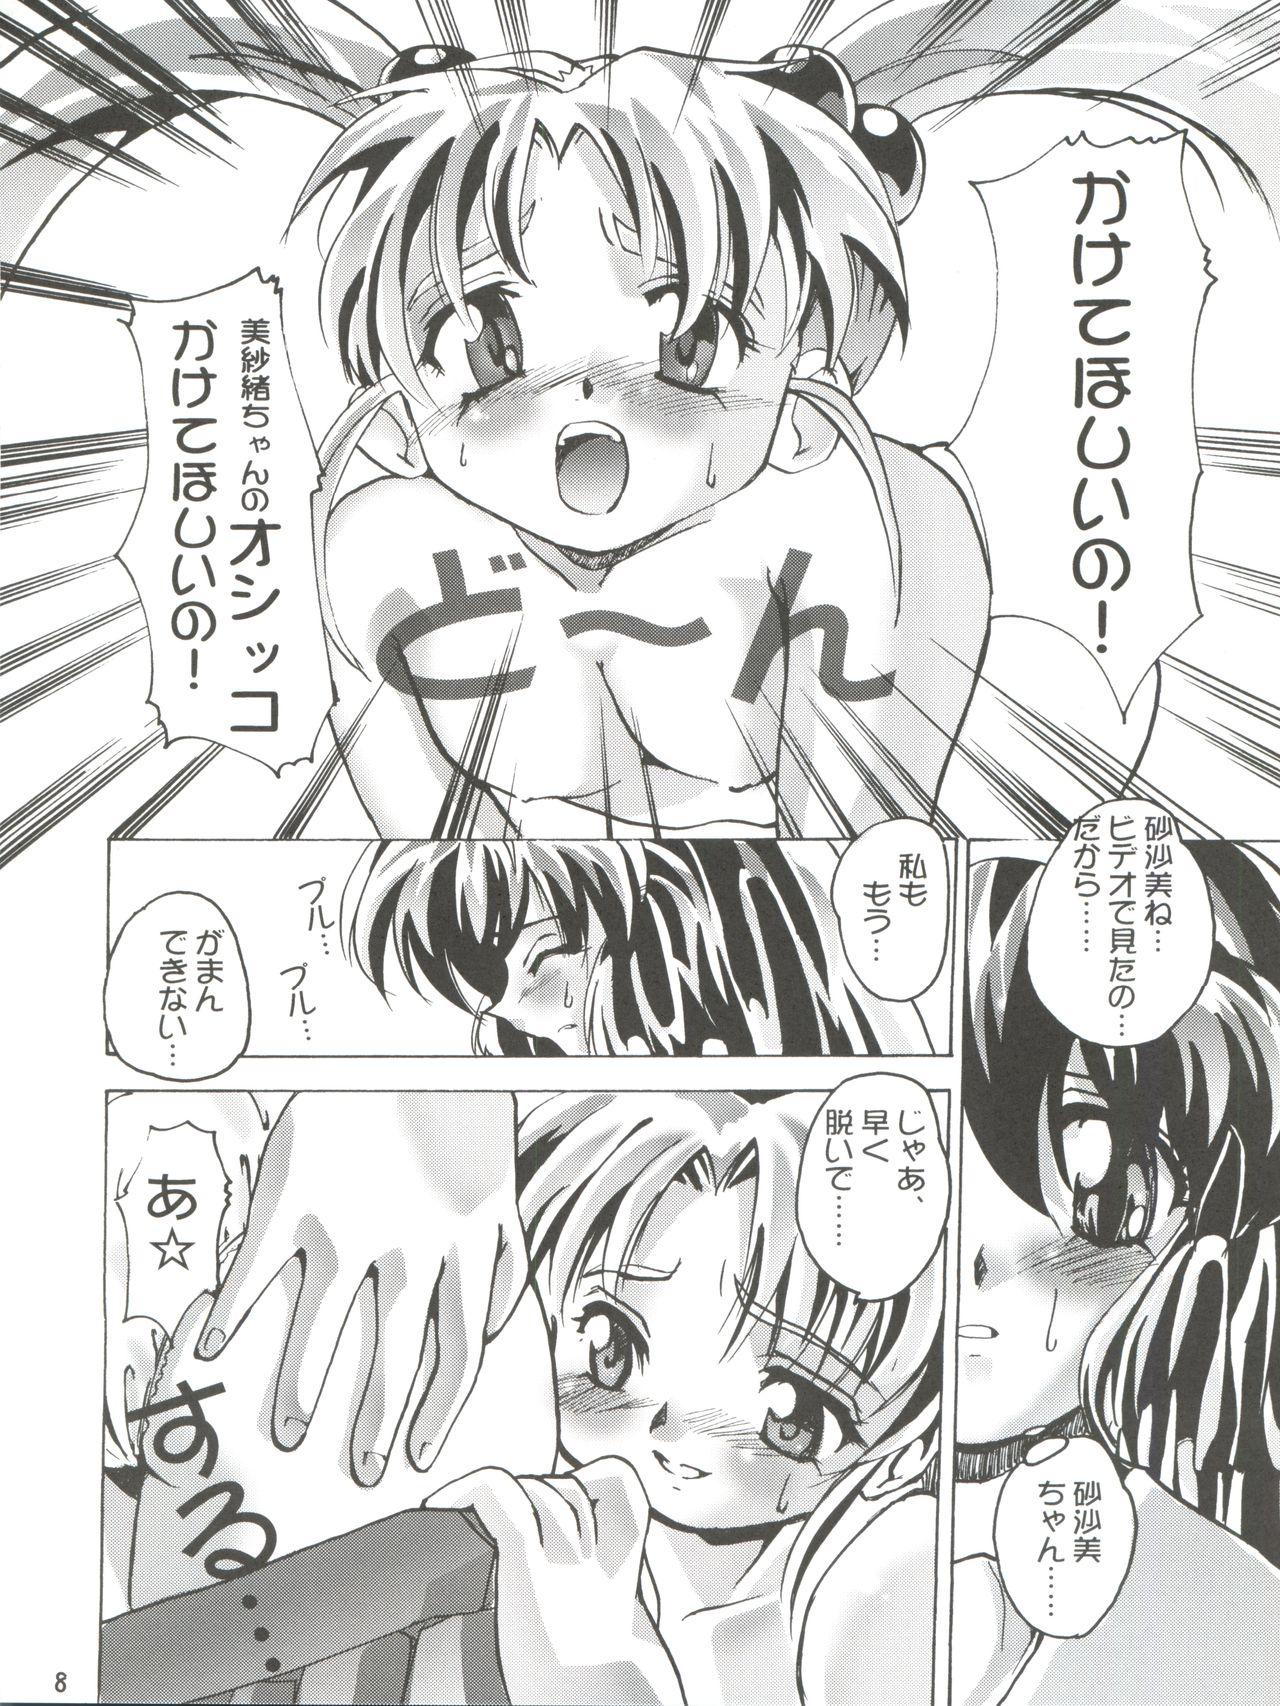 Adorable MisaOnly - Pretty sammy 1080p - Page 10